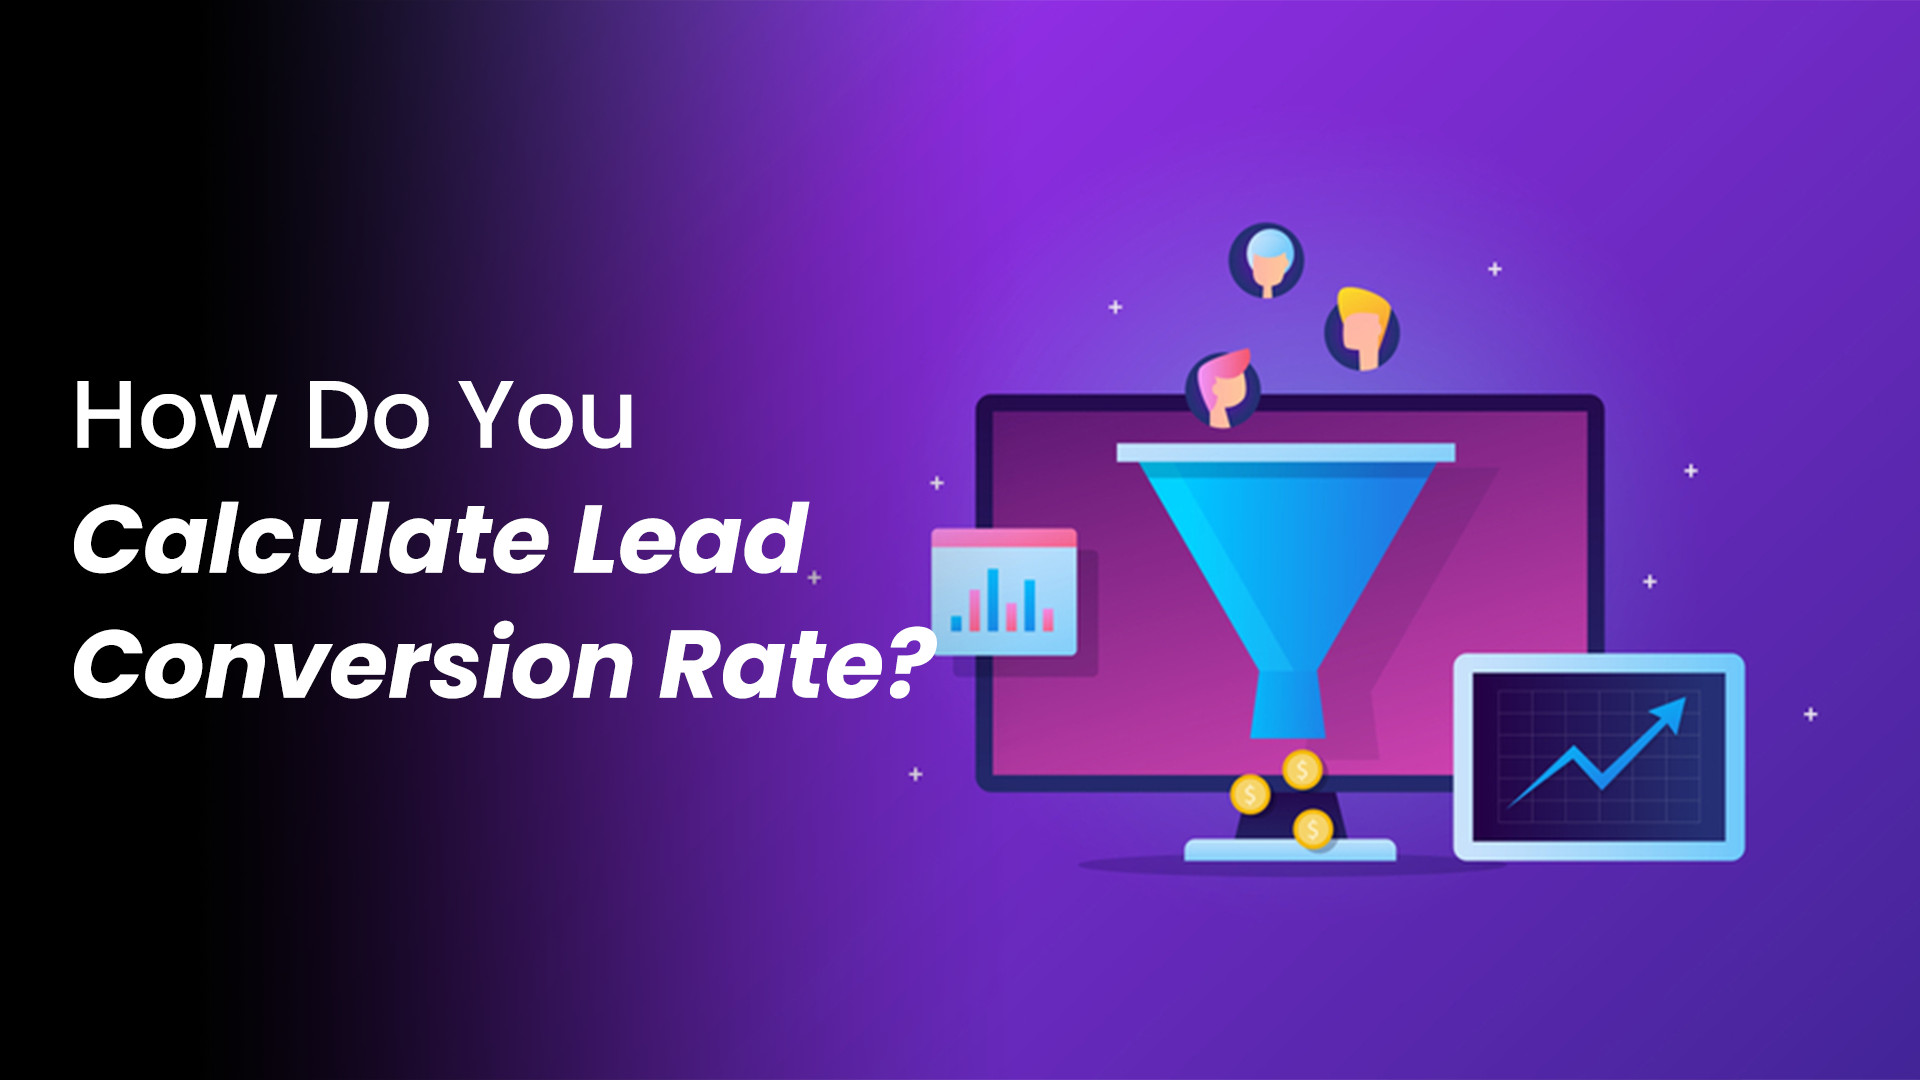 How To Calculate Lead Conversion Rate